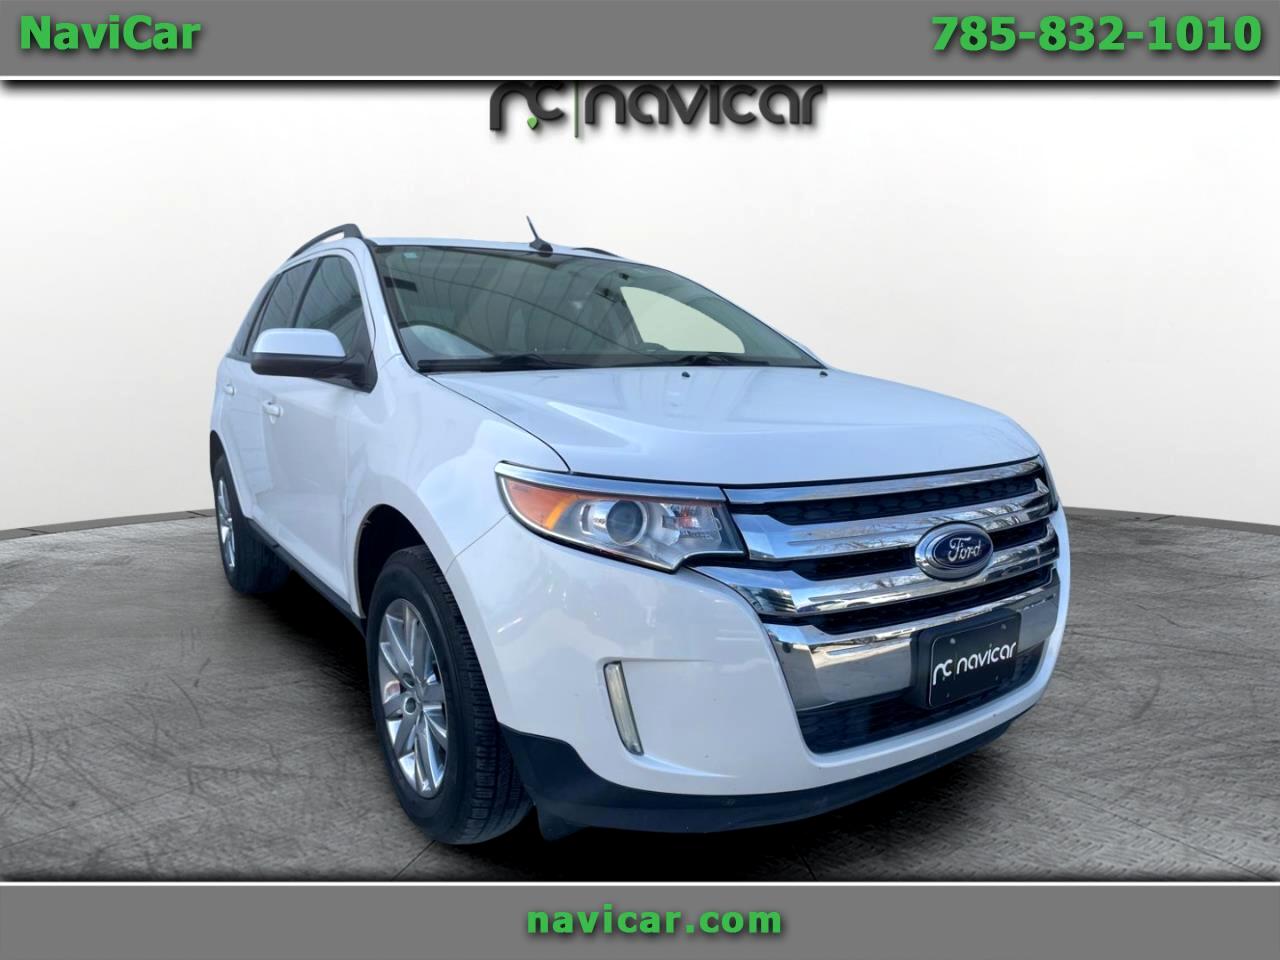 2013 Ford Edge SEL FWD